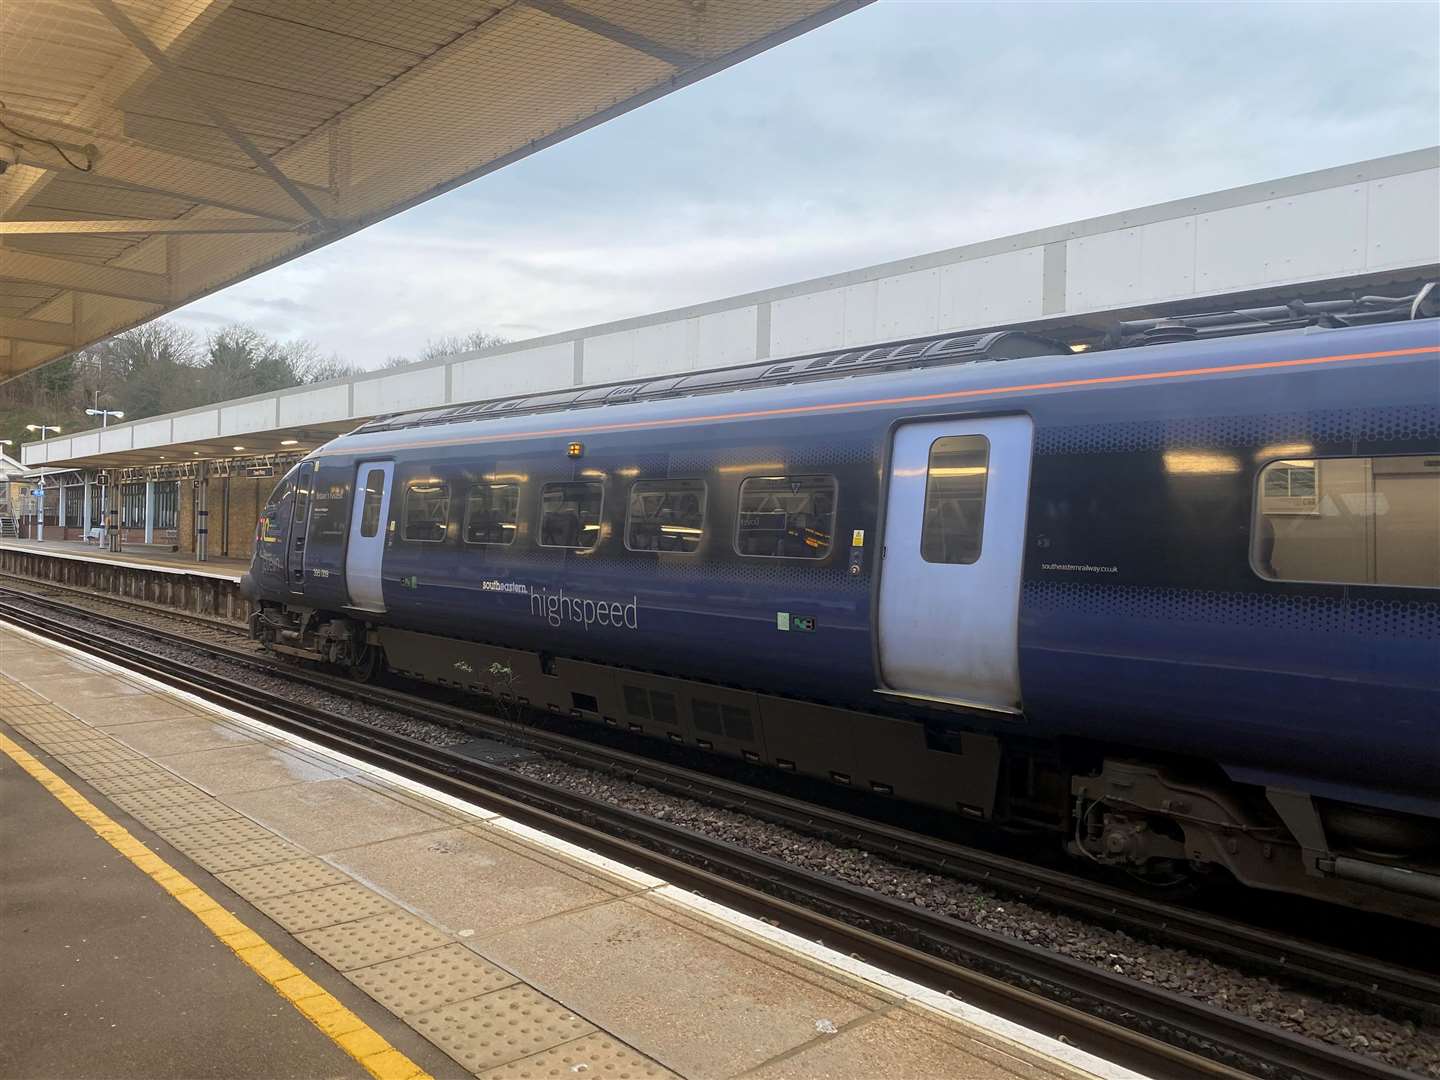 Southeastern services to the capital will be disrupted this weekend